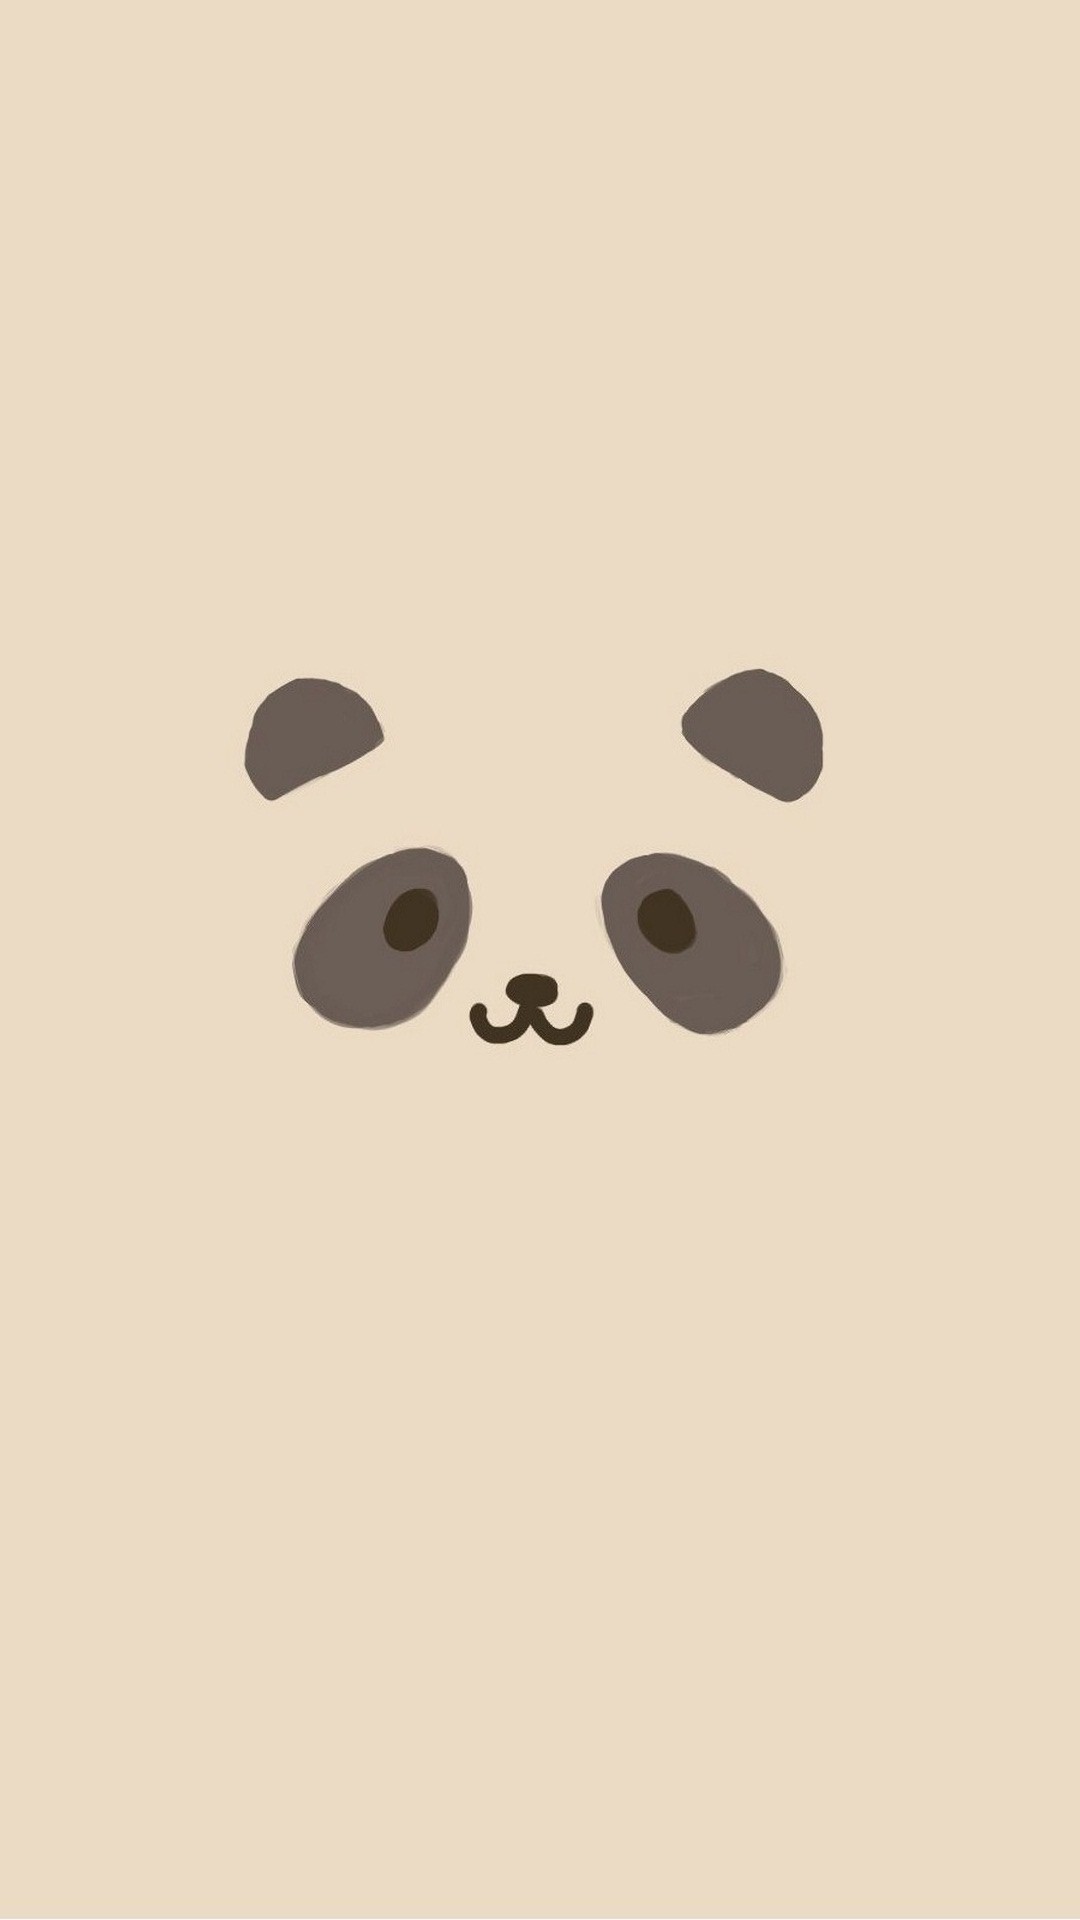 Wallpaper Panda Cute Android with HD resolution 1080x1920